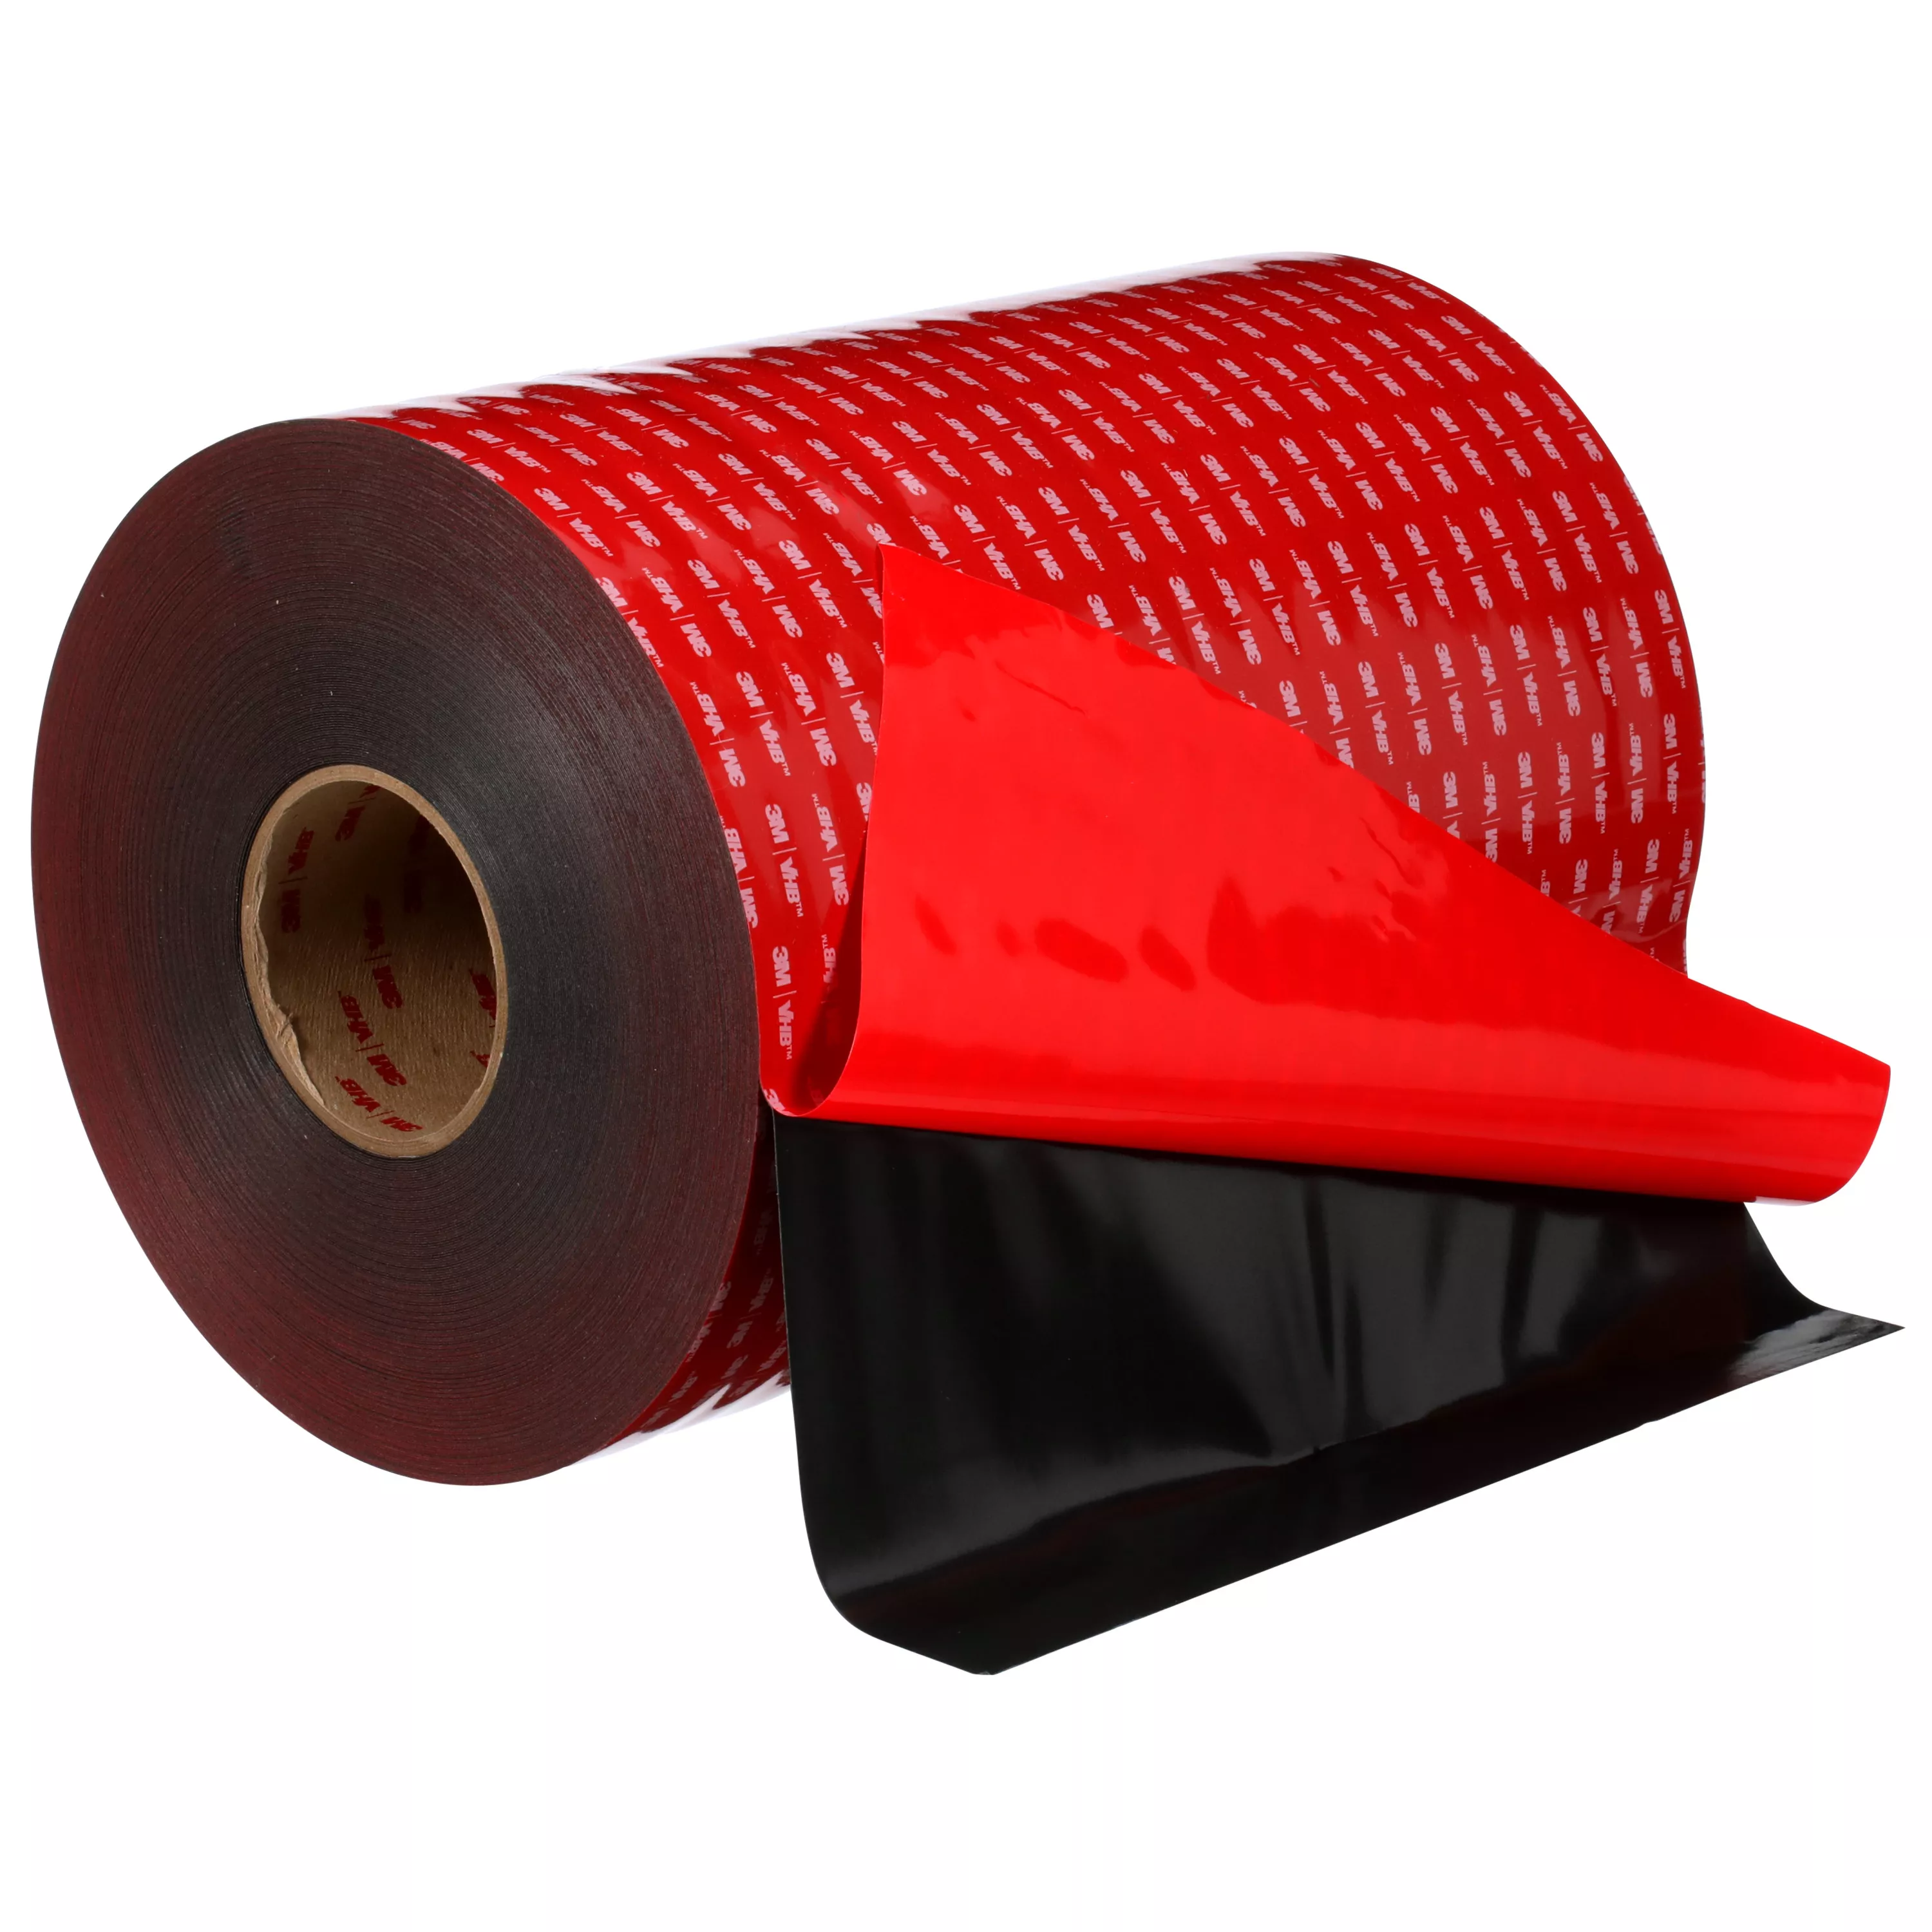 Product Number 5915 | 3M™ VHB™ Tape 5915